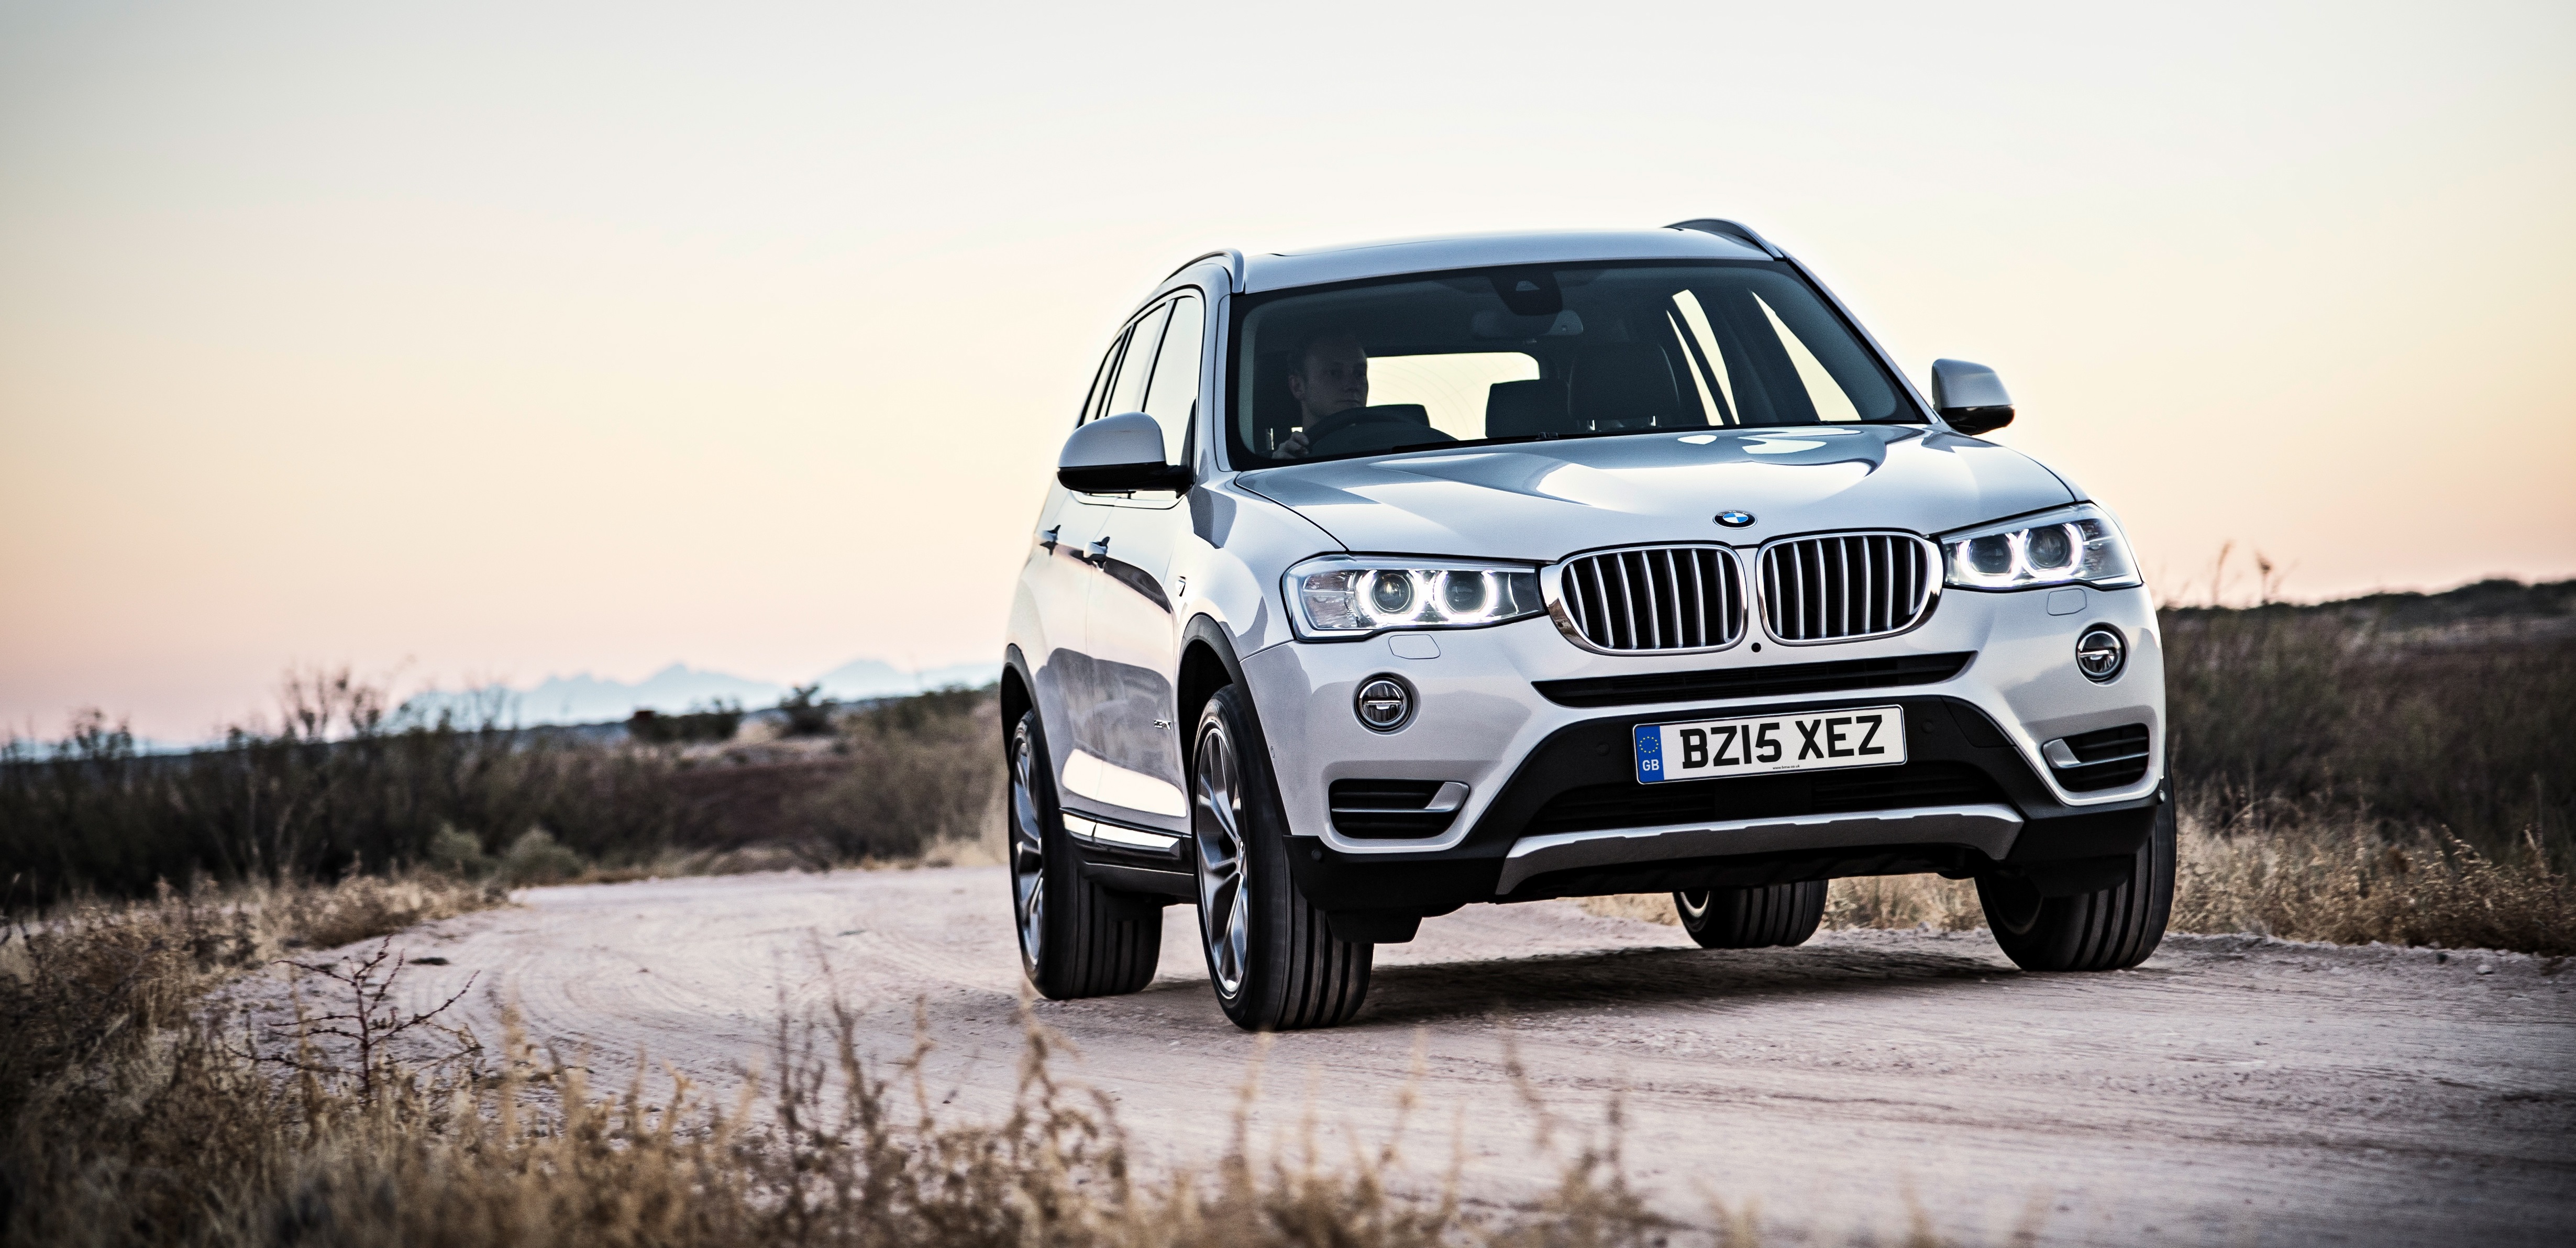 thirst shorten Now BMW X3 – sizes, dimensions and towing weights | carwow